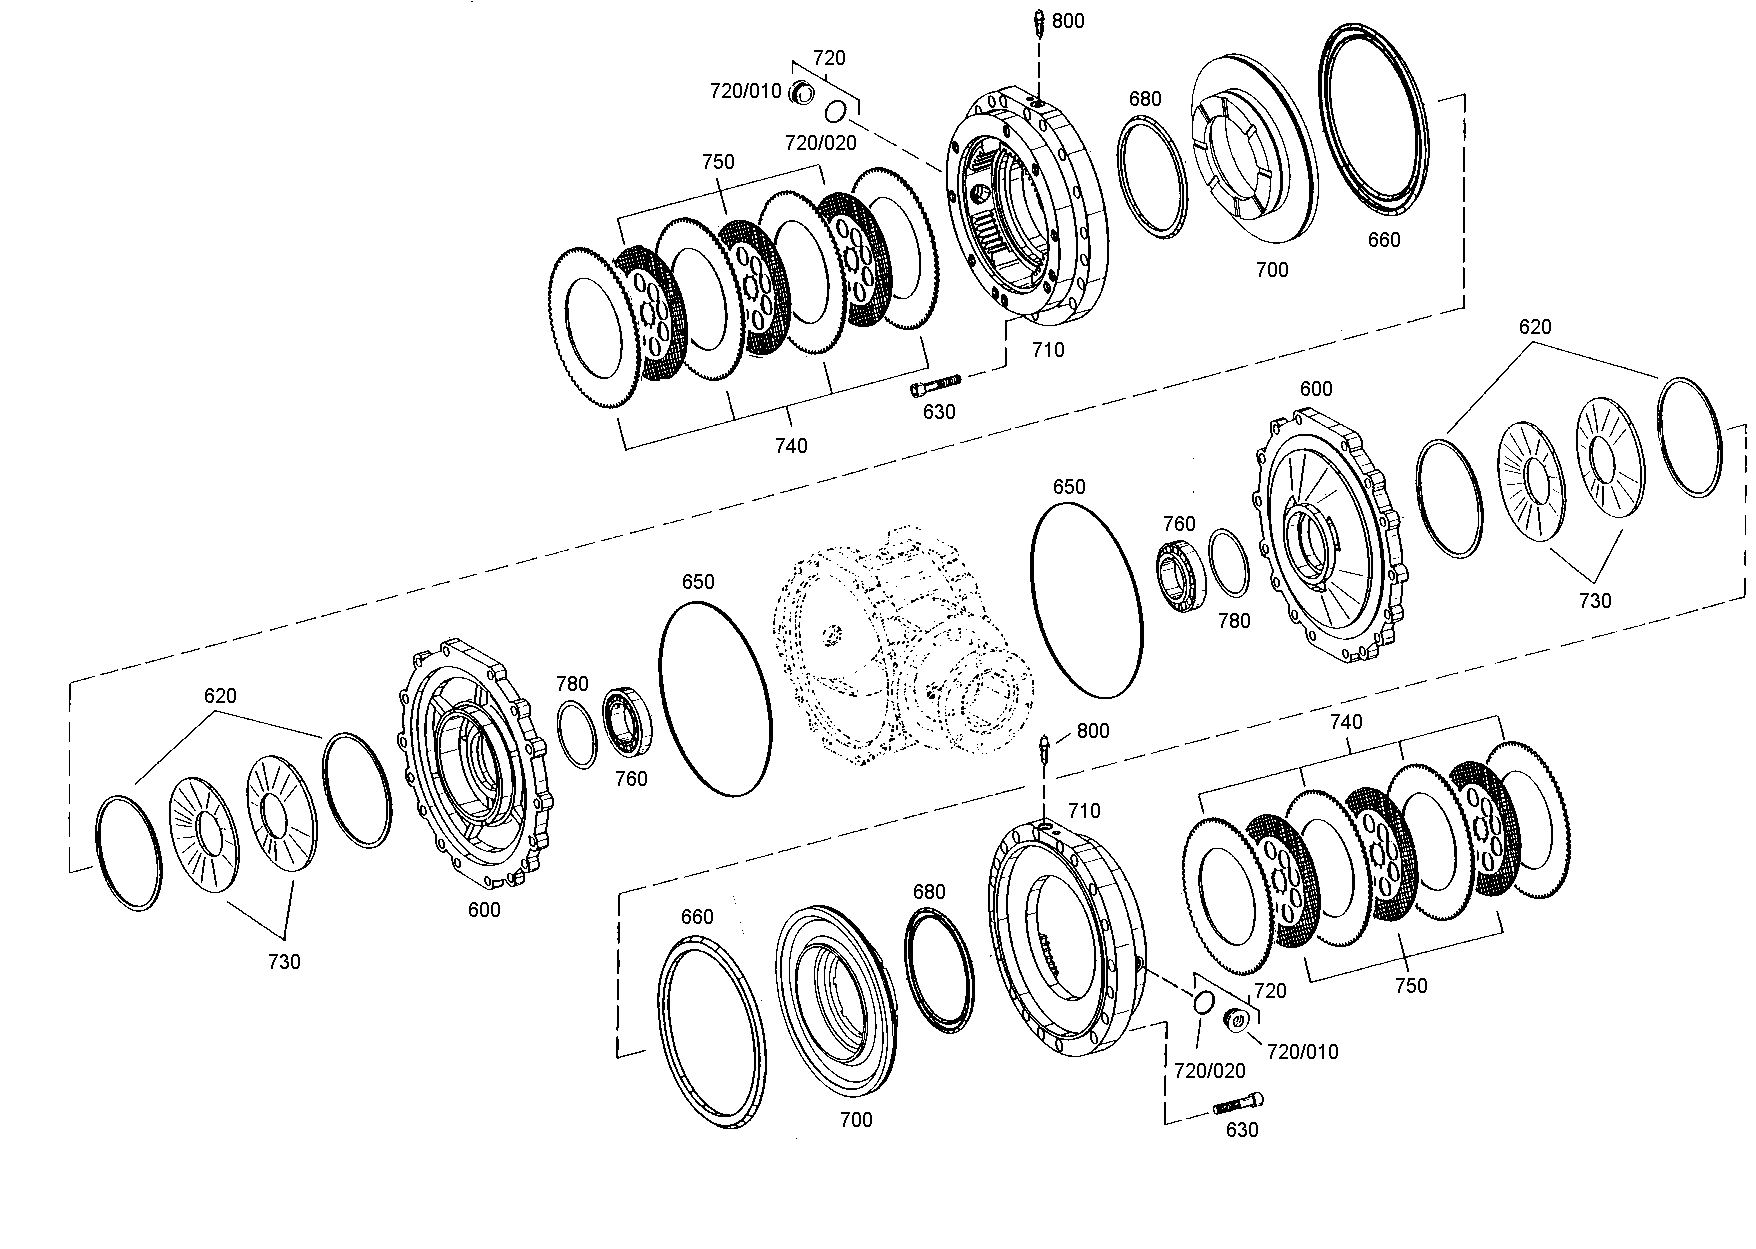 drawing for HAMM AG 1282263 - WASHER (figure 4)